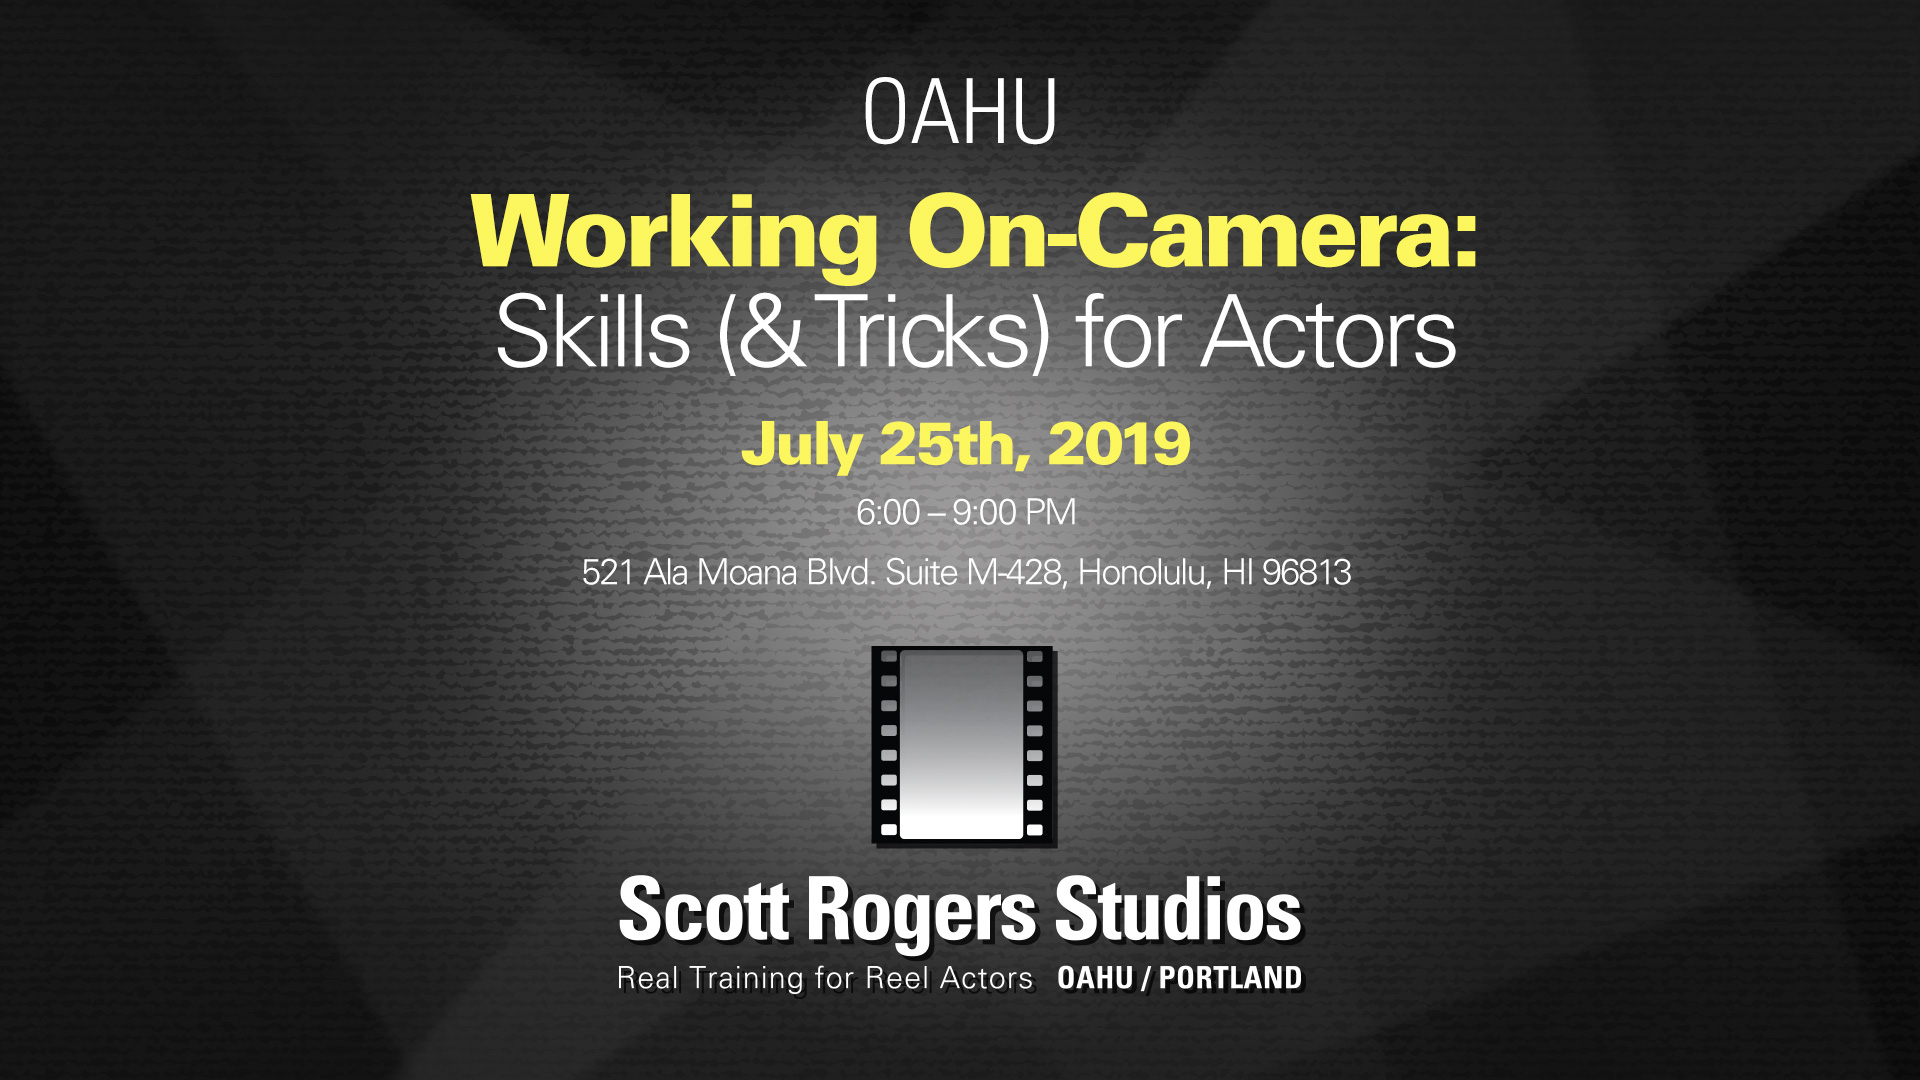 Working On-Camera: Skills (& Tricks) for Actors